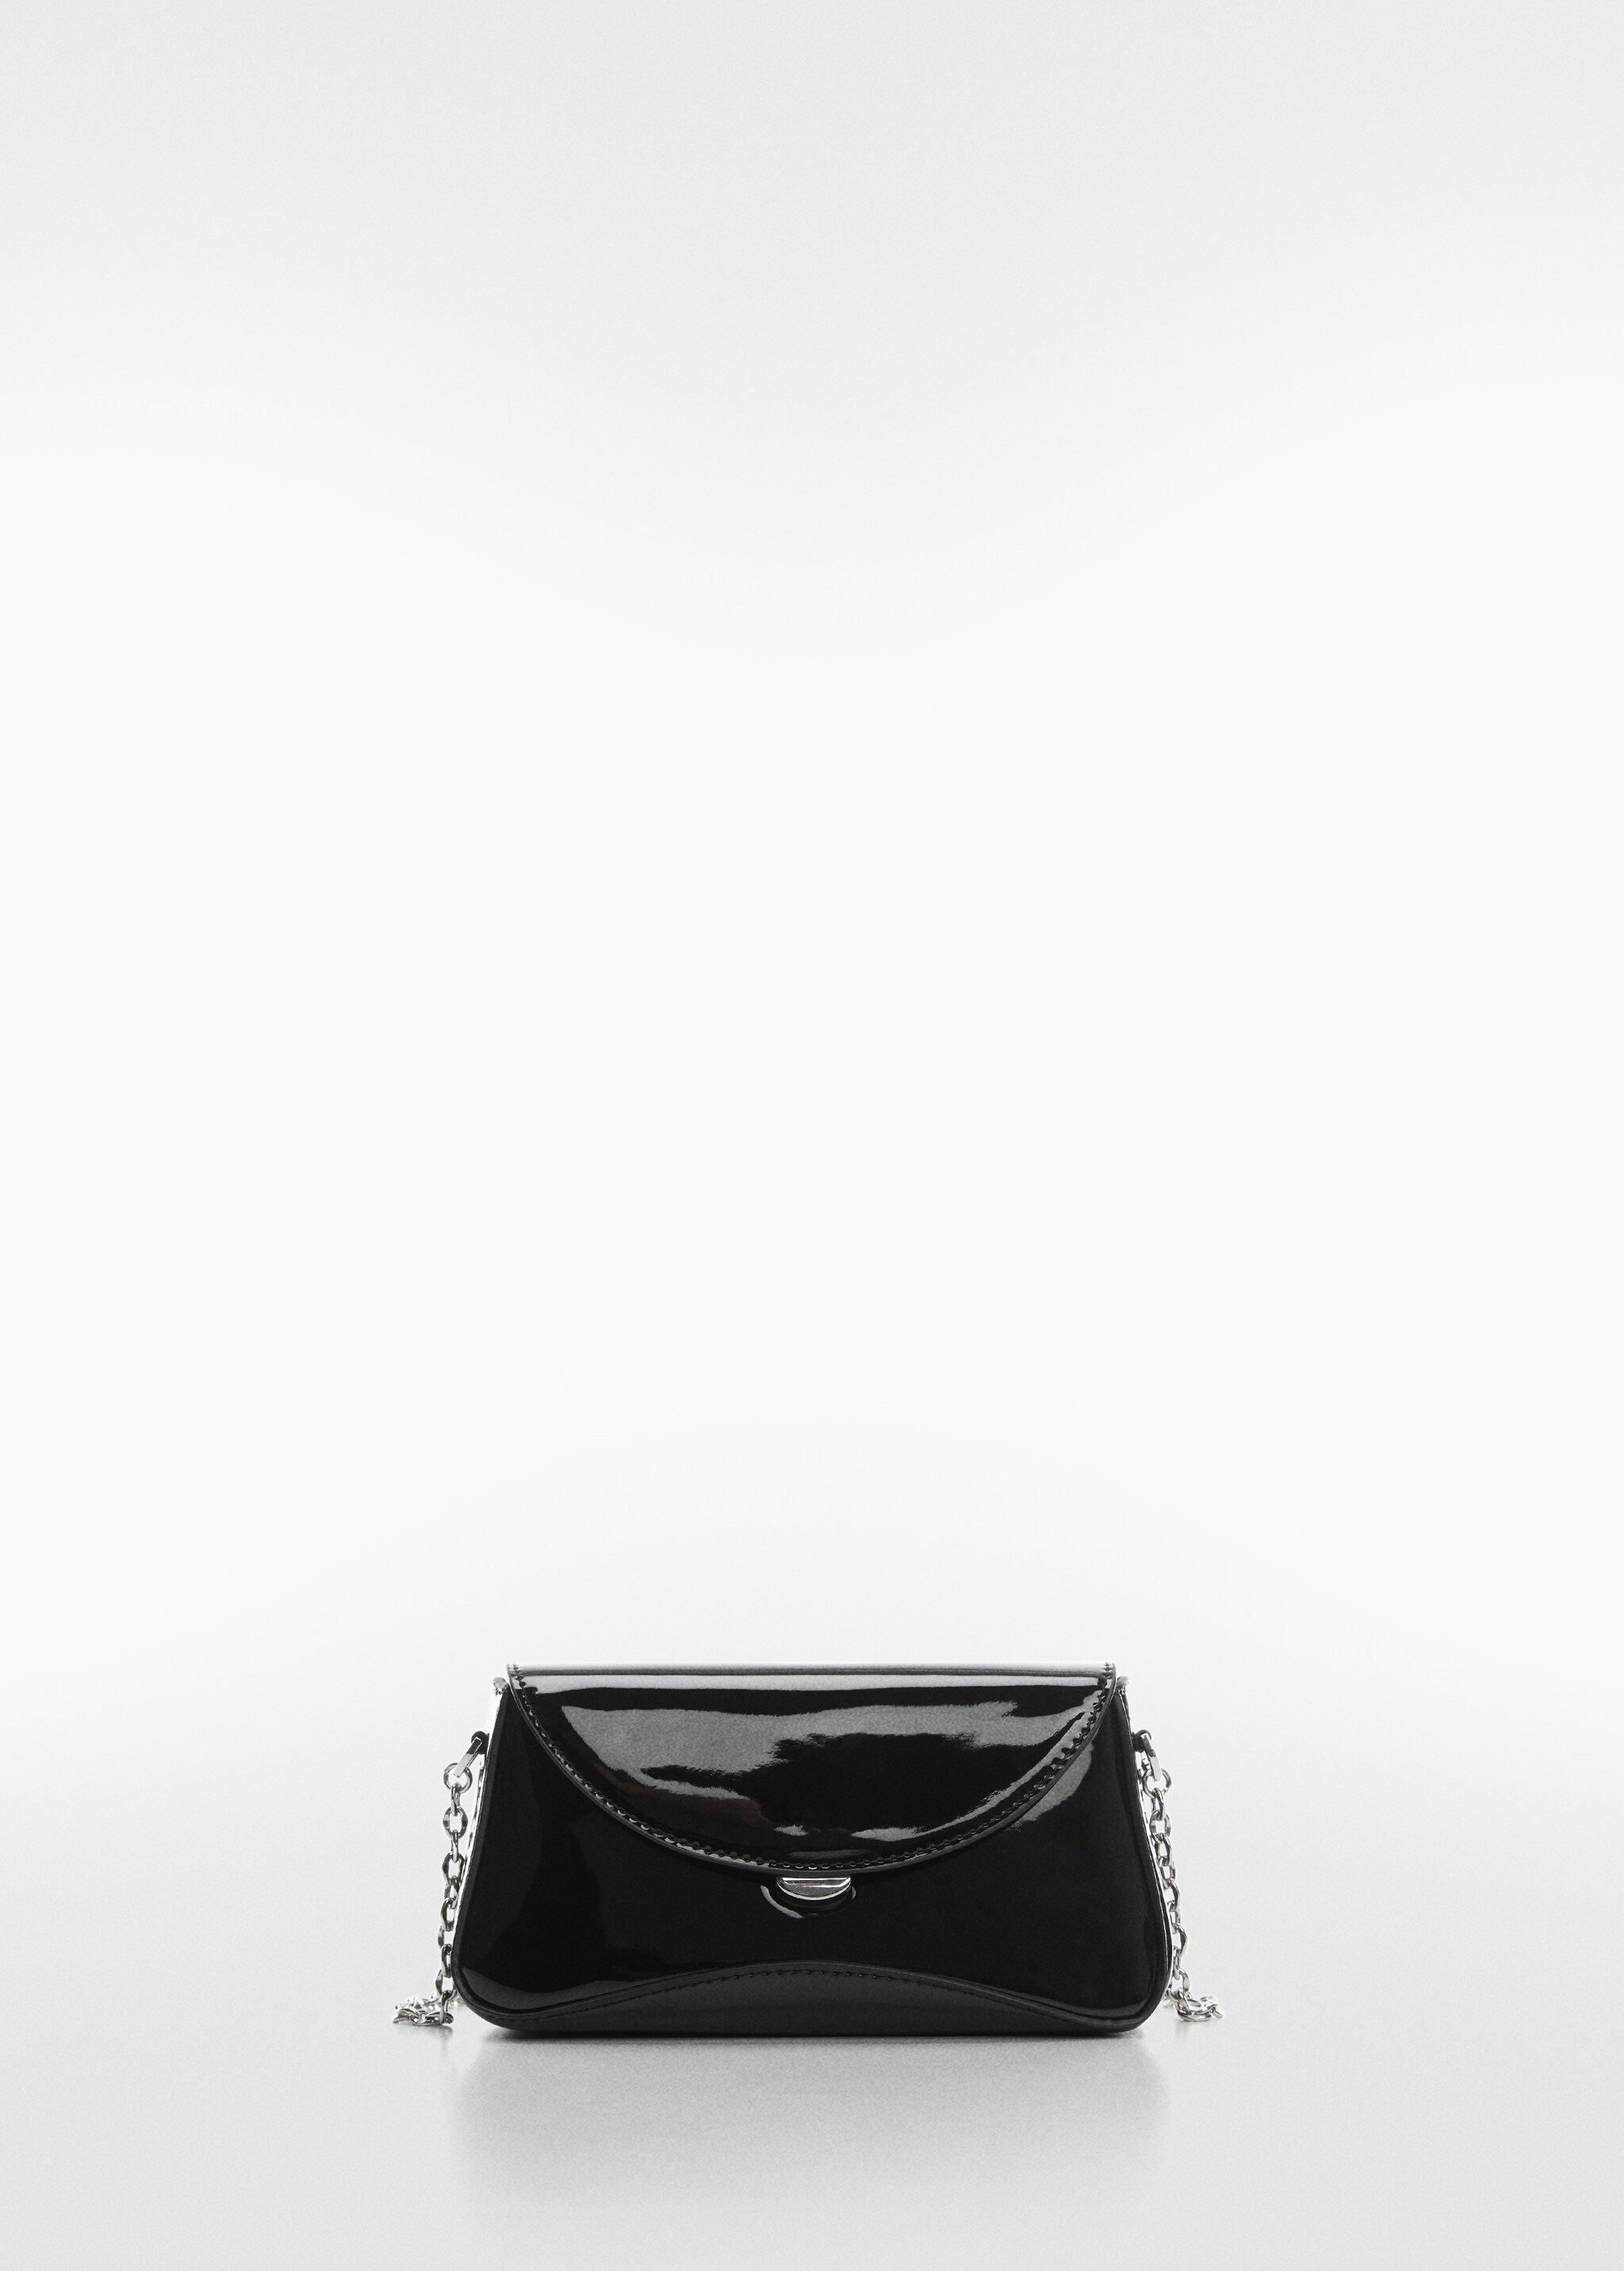 Patent leather chain handbag - Article without model